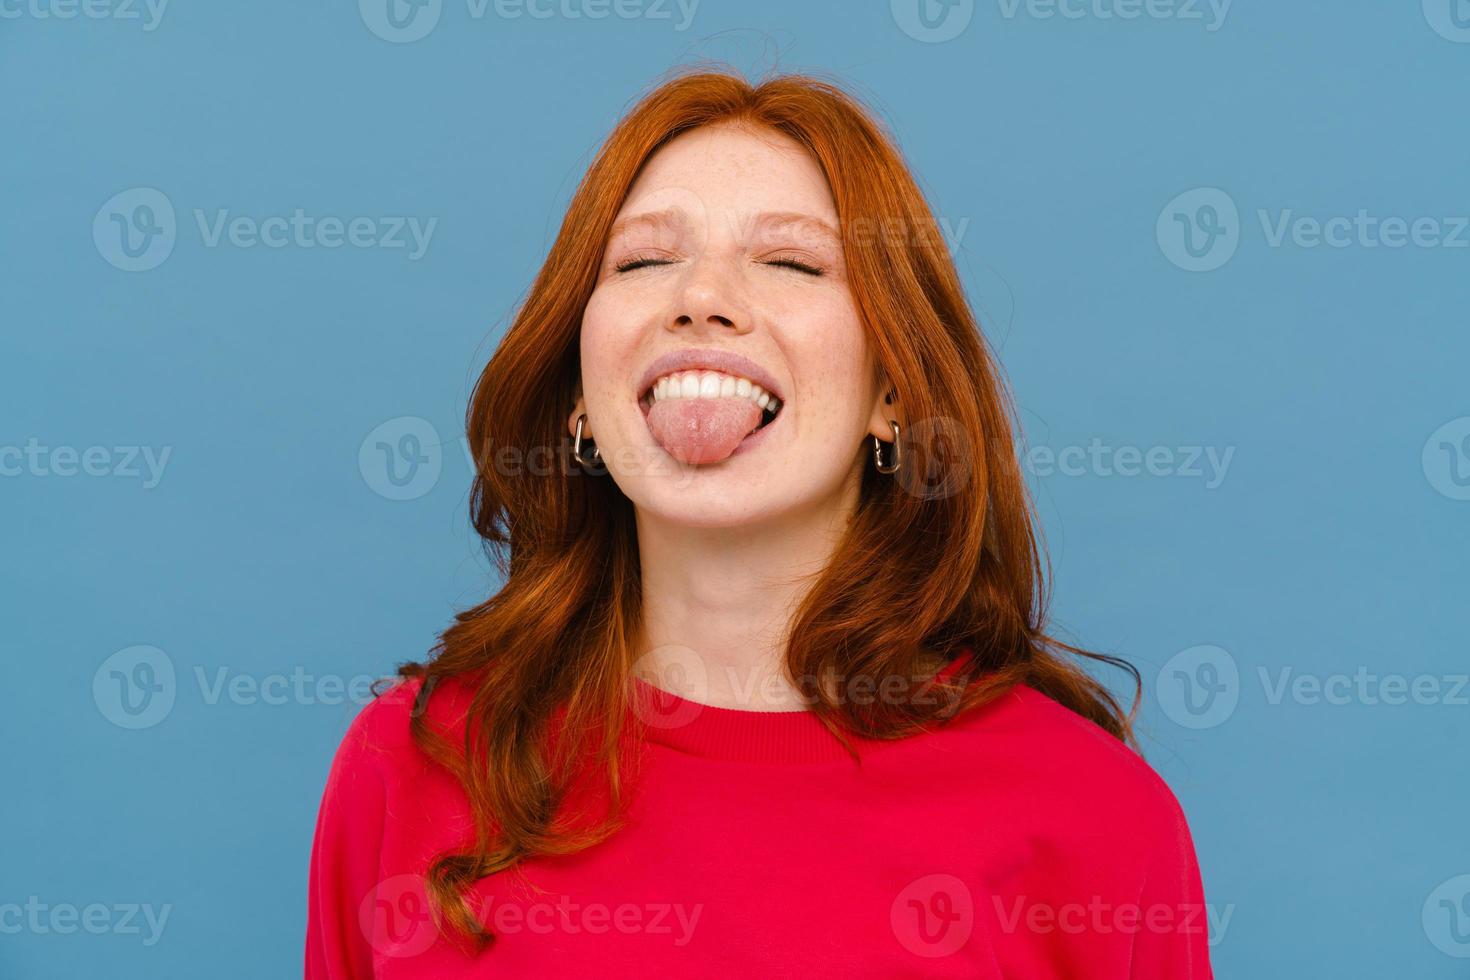 Ginger-haired woman wearing red sweater laughing while showing her tongue photo